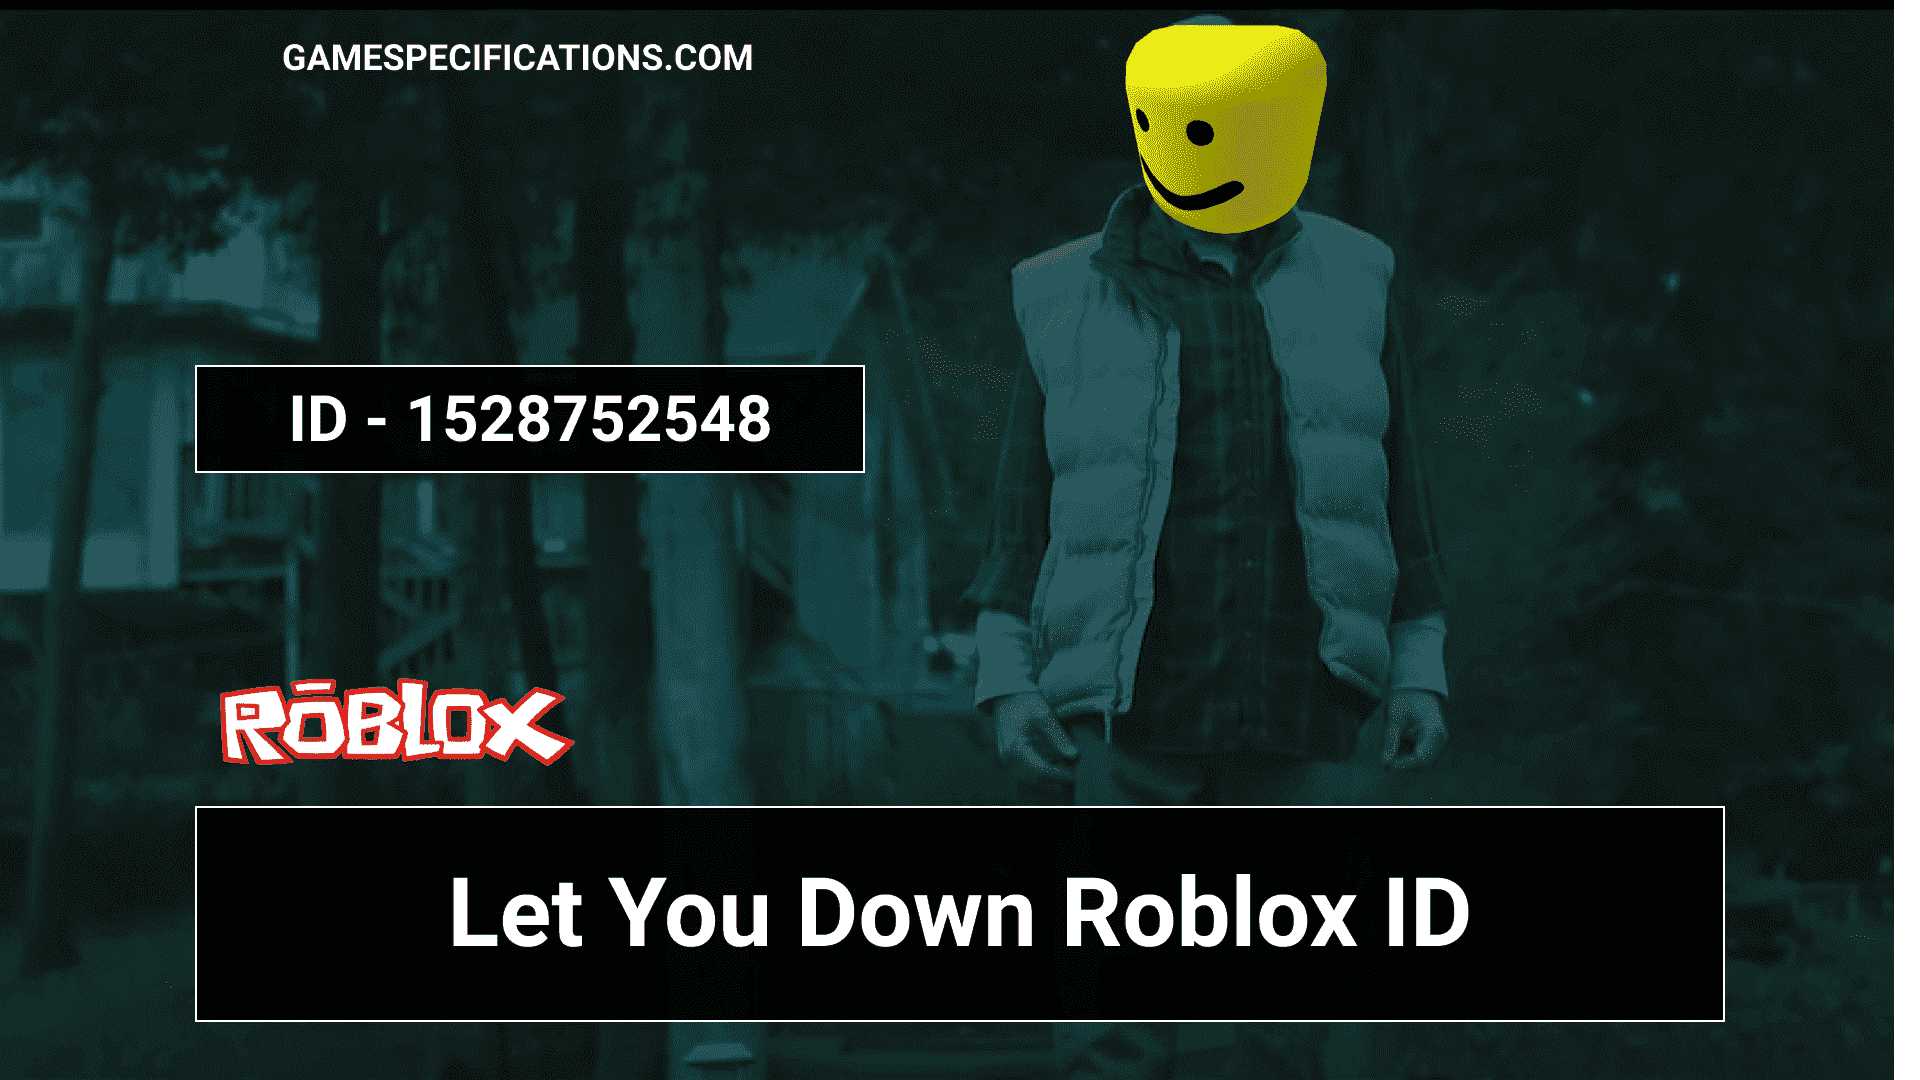 Let You Down Roblox Id Codes To Play The Nf Music 2021 Game Specifications - time nf roblox id code